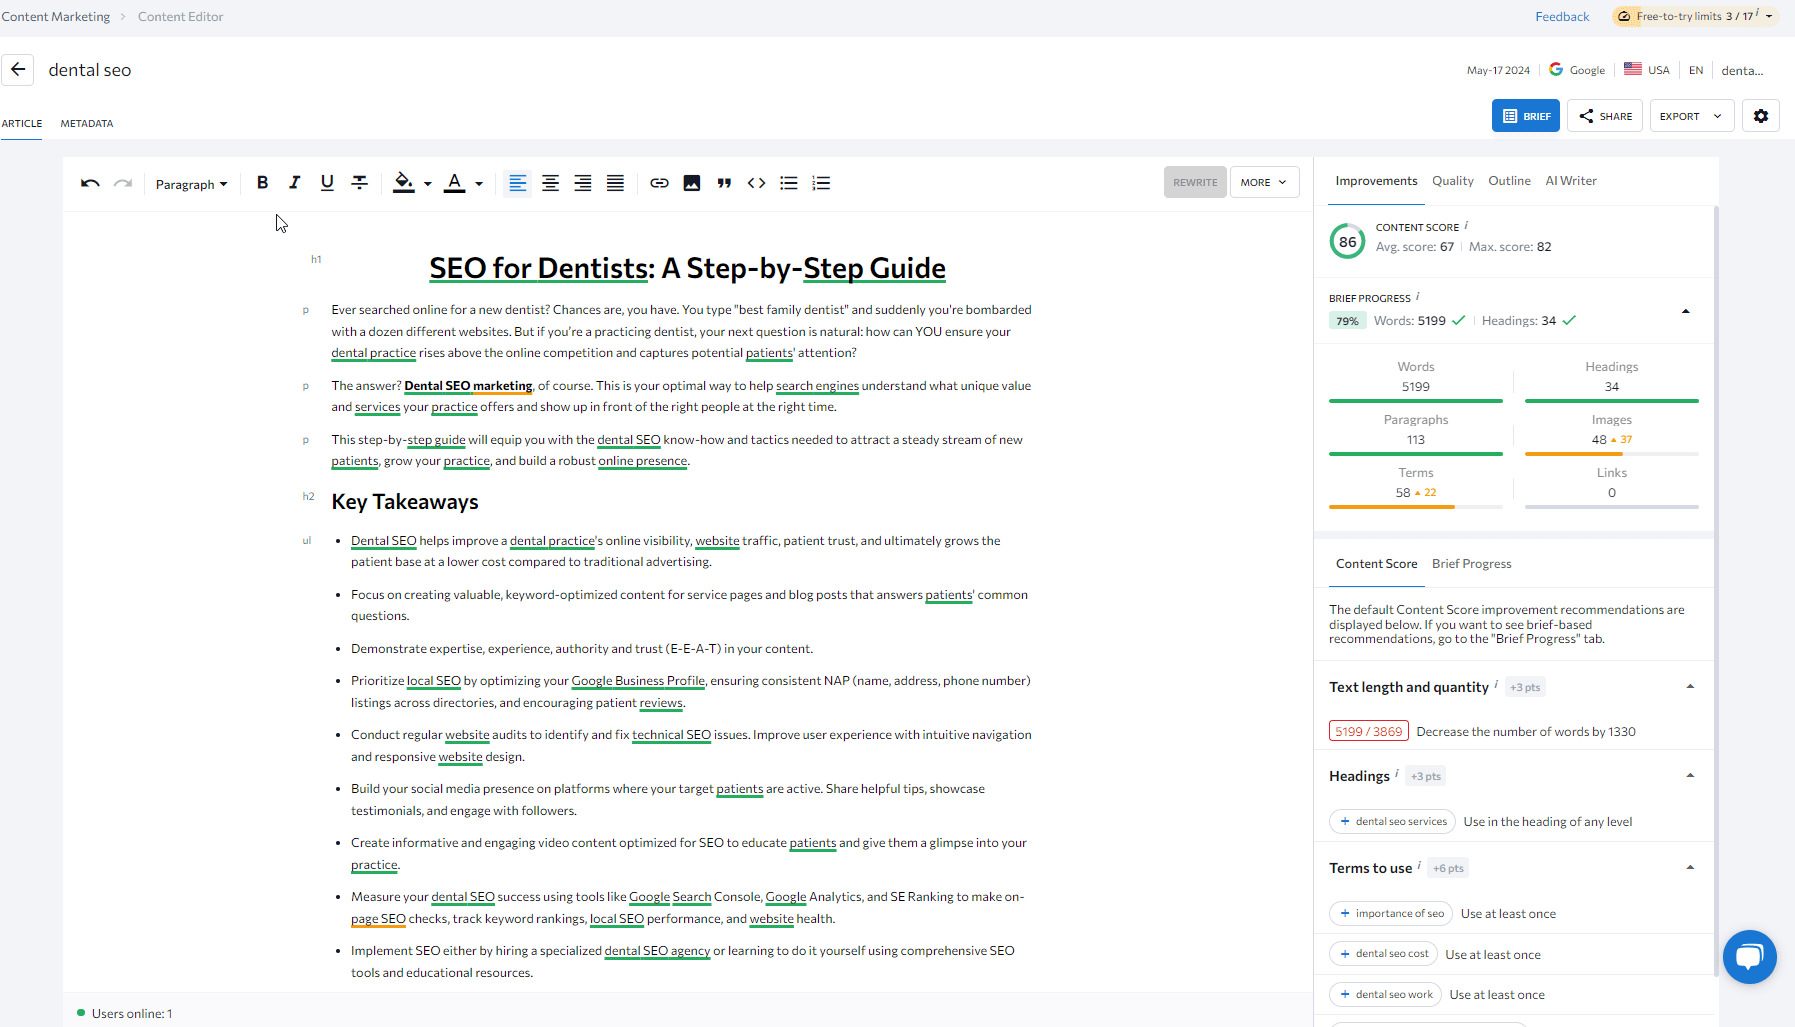 SE Ranking's Content Editor interface